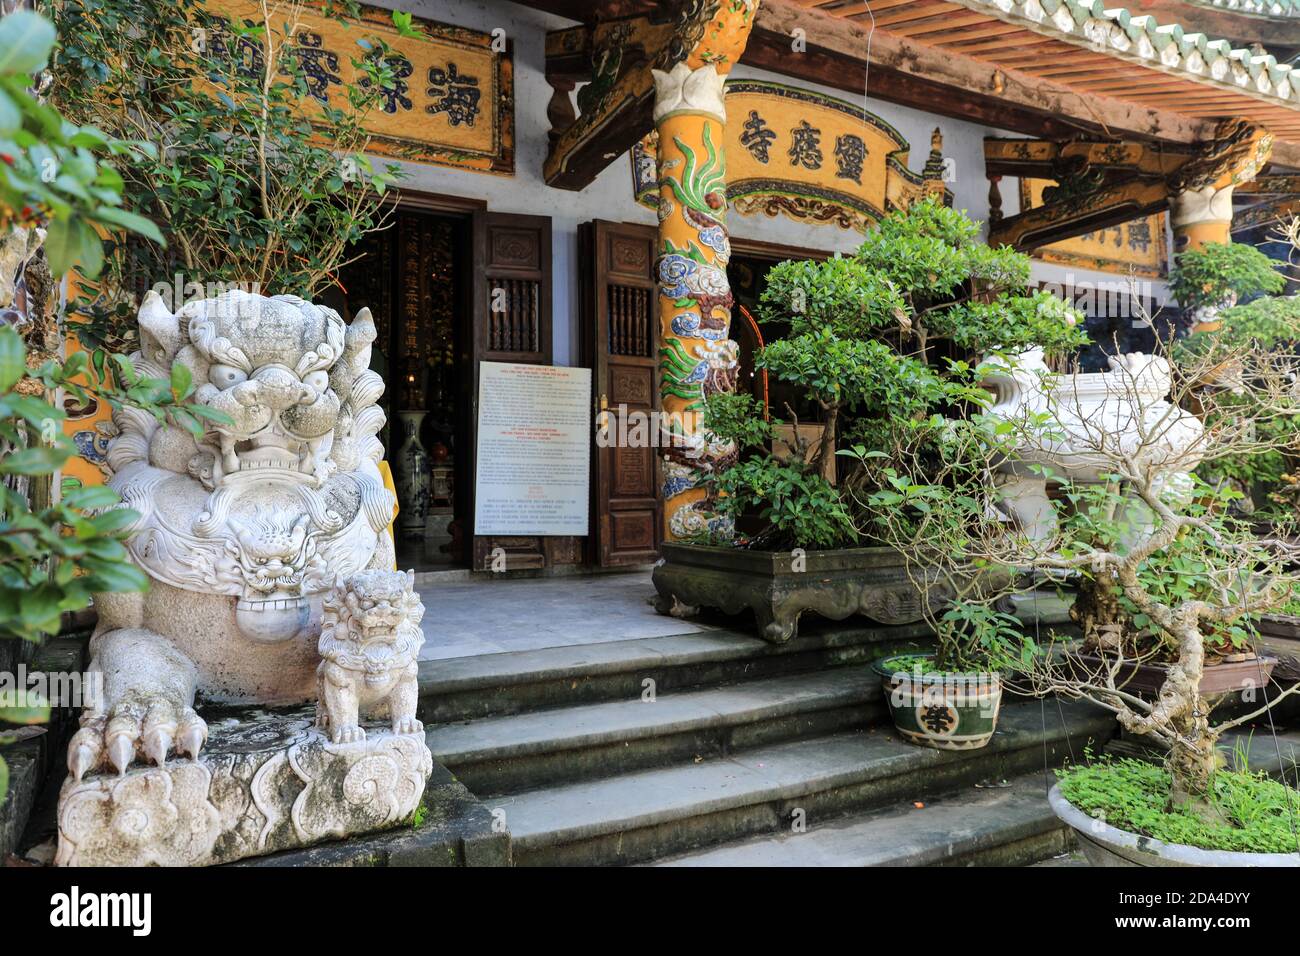 A carved stone dragon at the entrance to the Linh Ung Pagoda on Thuy Son Mountain, the Marble Mountains, Da Nang, Vietnam, Asia Stock Photo